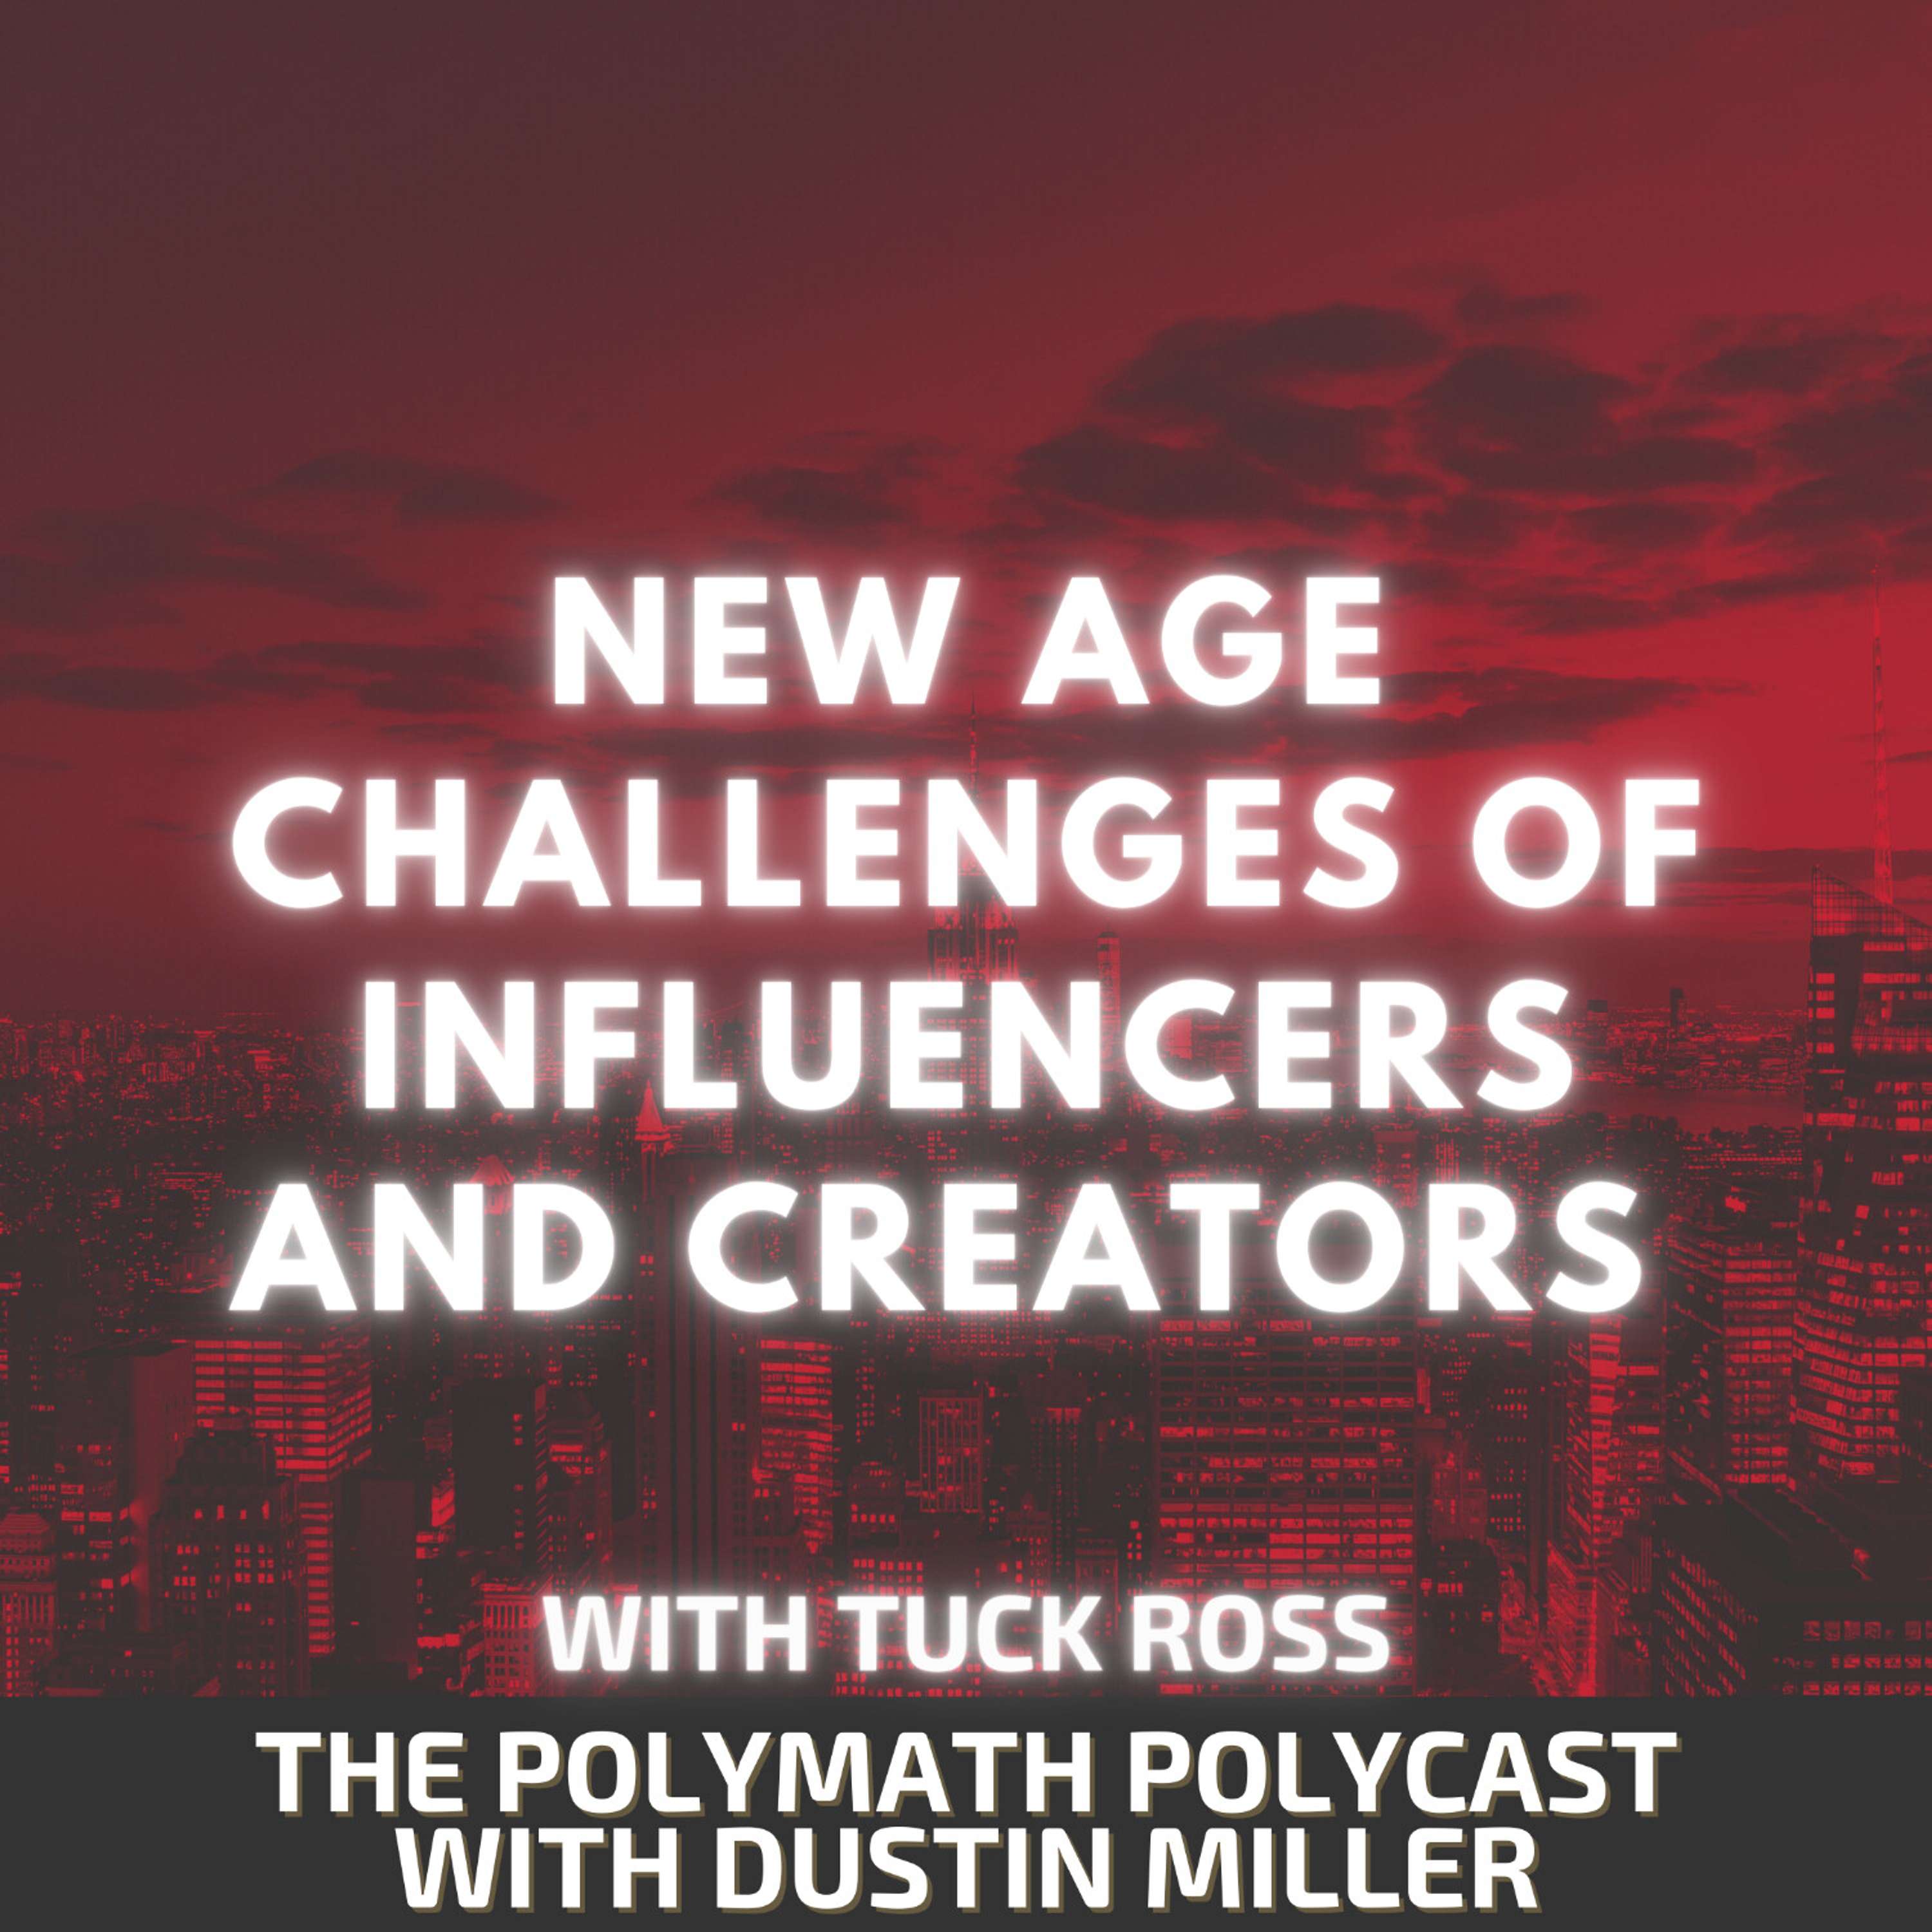 New Age Challenges of Influencers and Creators with Tuck Ross [Interview]